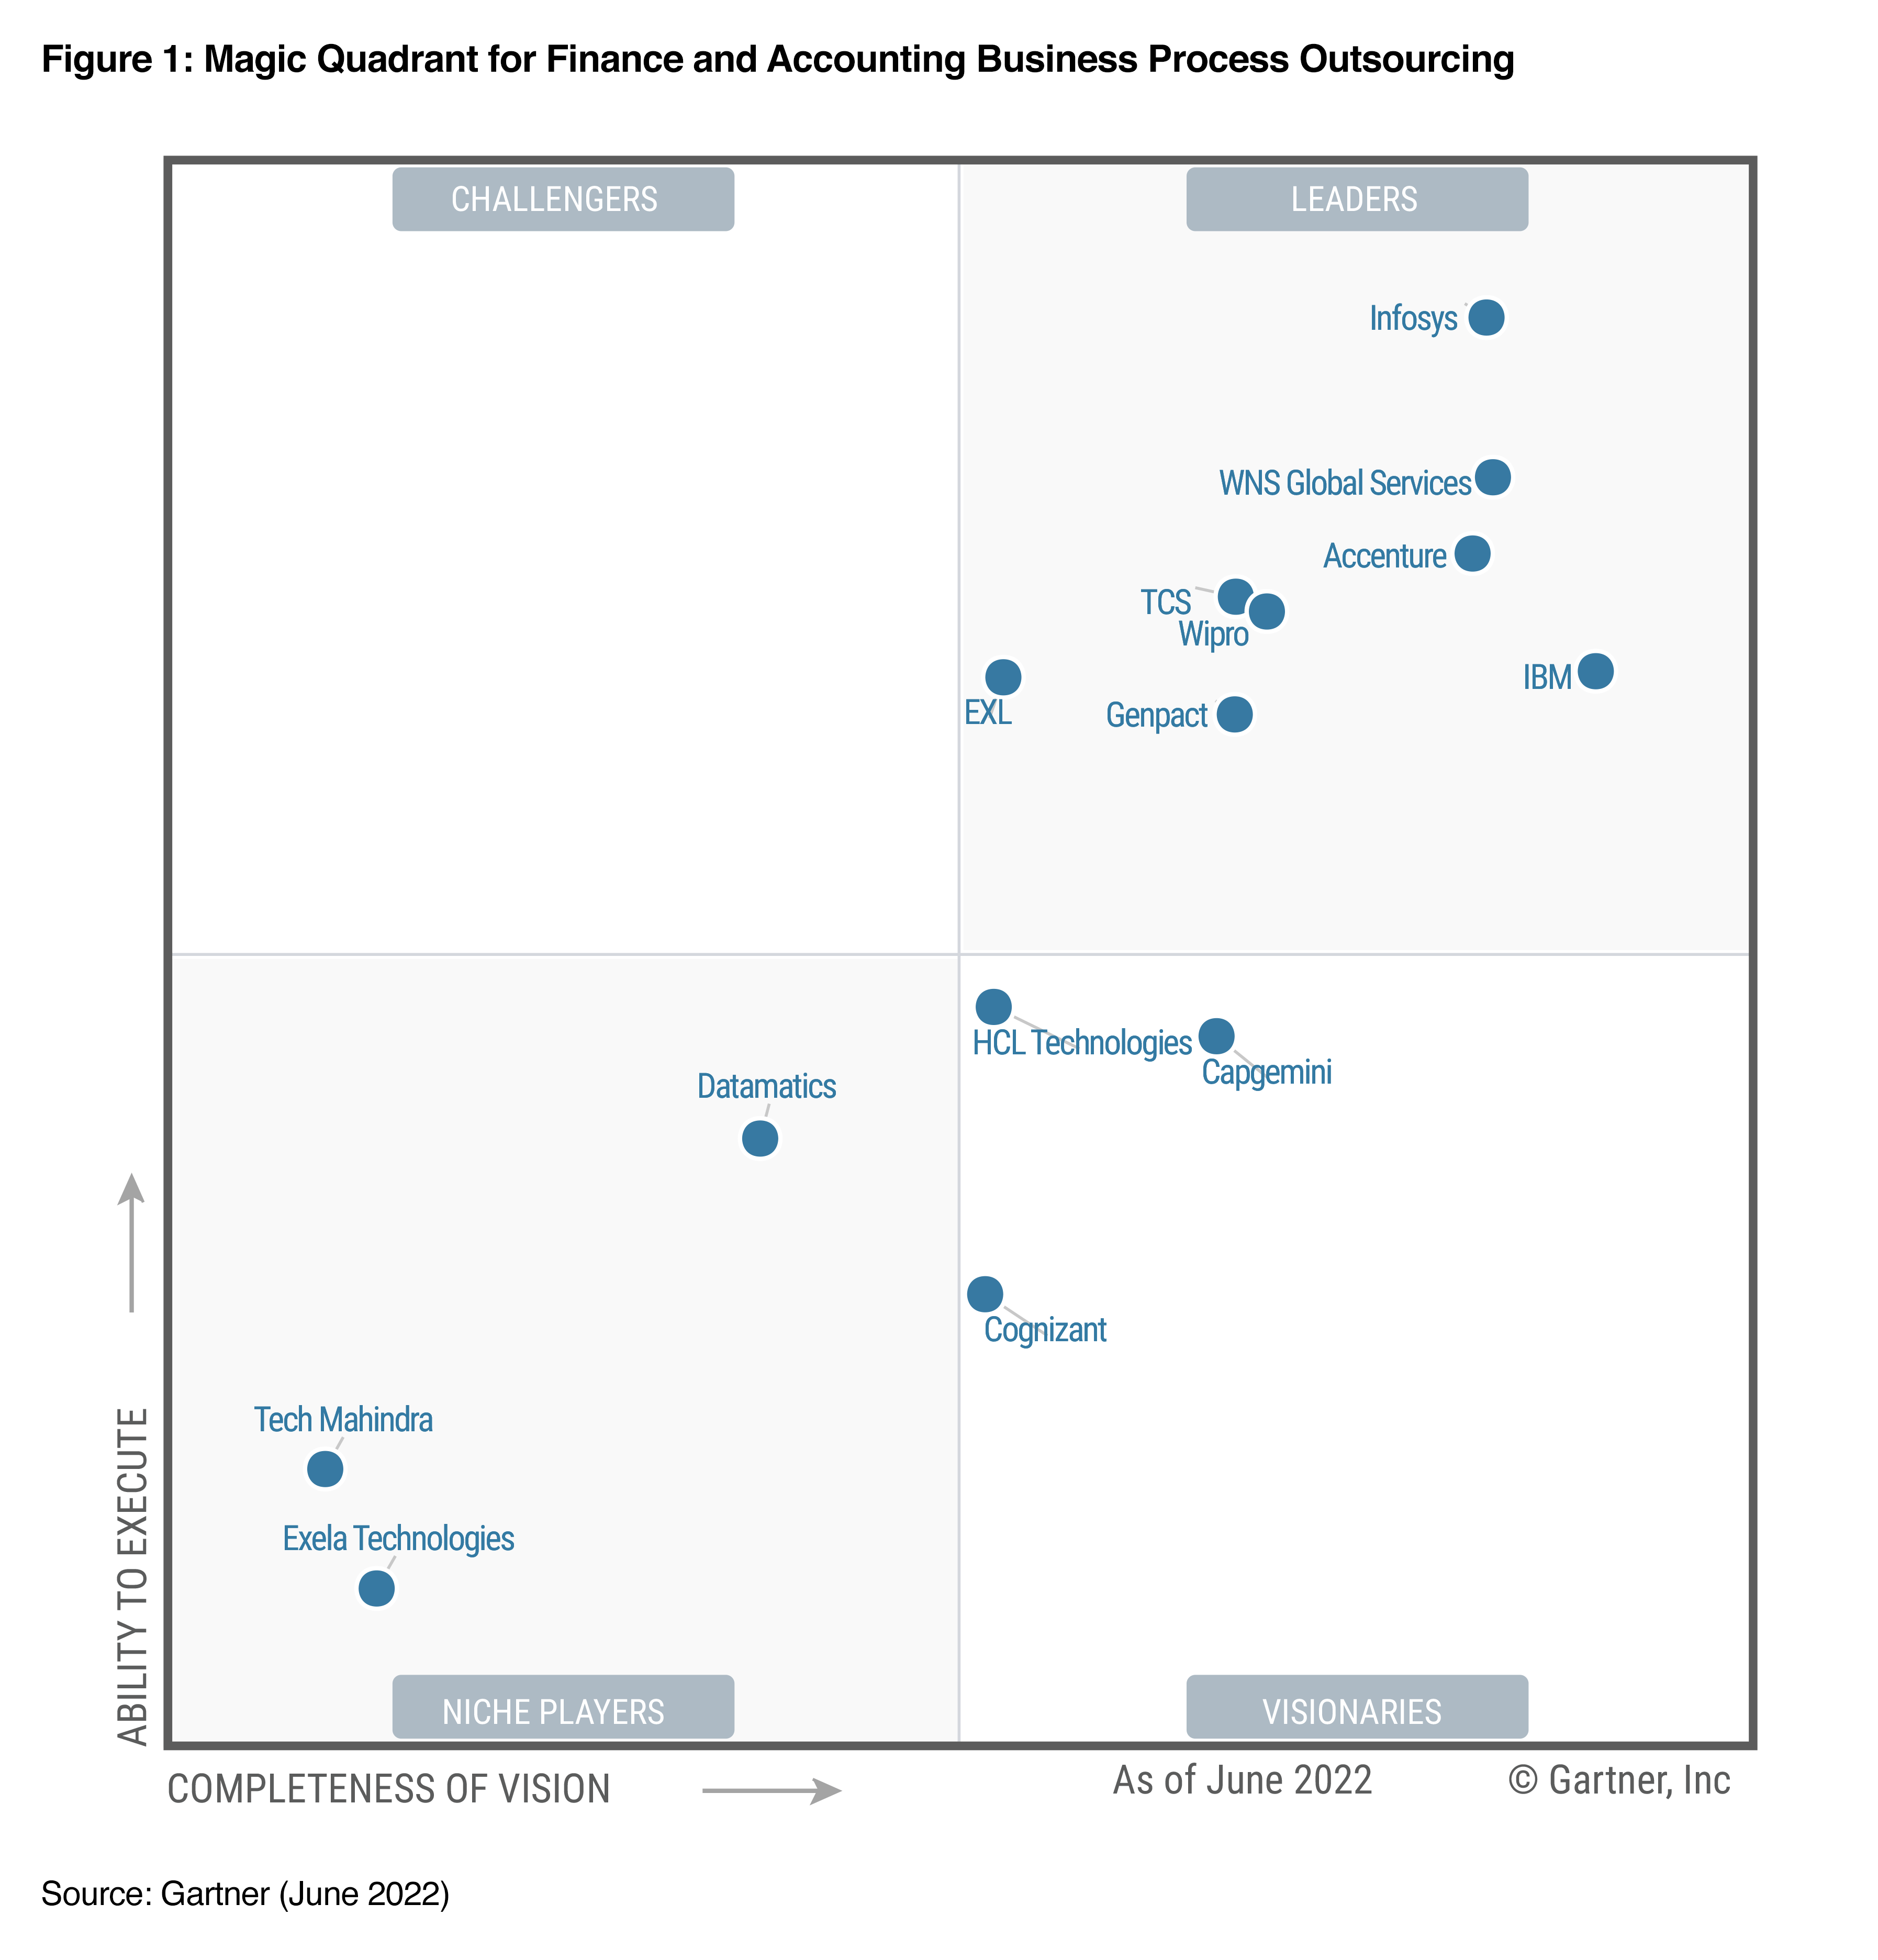 Magic Quadrant 2022 for Finance and Accounting Business Process Outsourcing Services